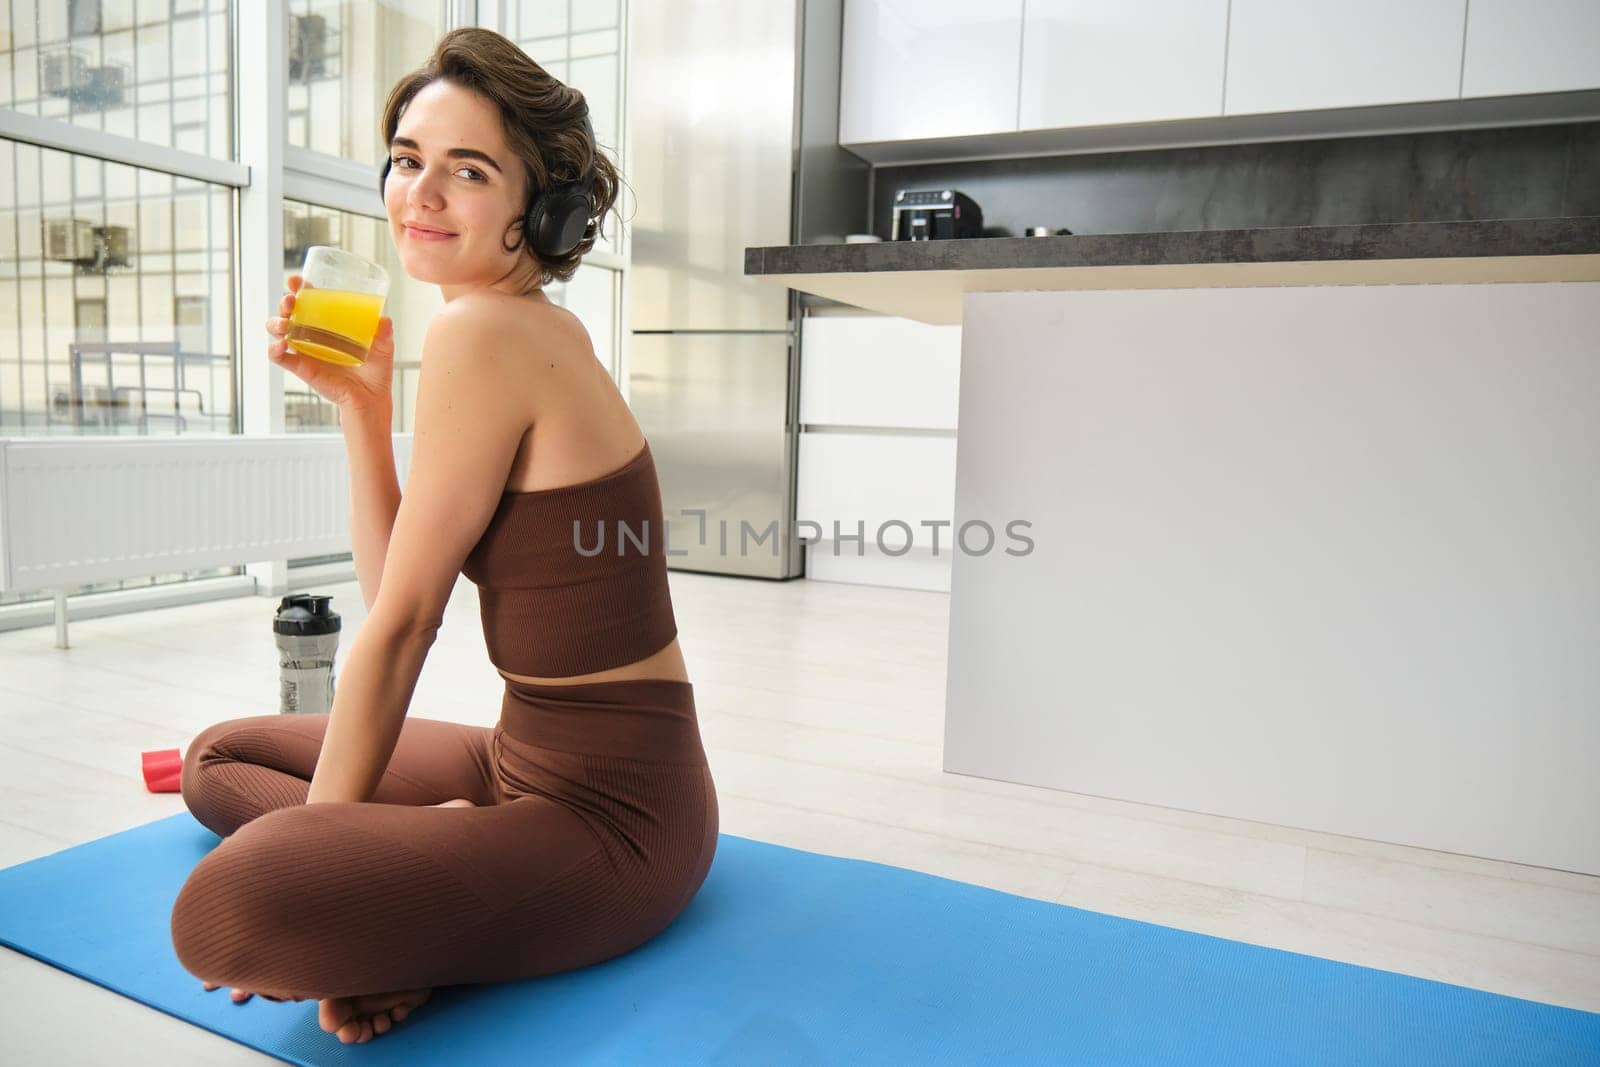 Sport and healthy lifestyle. Sportswoman at home, workout, drinks orange juice after fitness training, doing sports indoors on rubber mat.